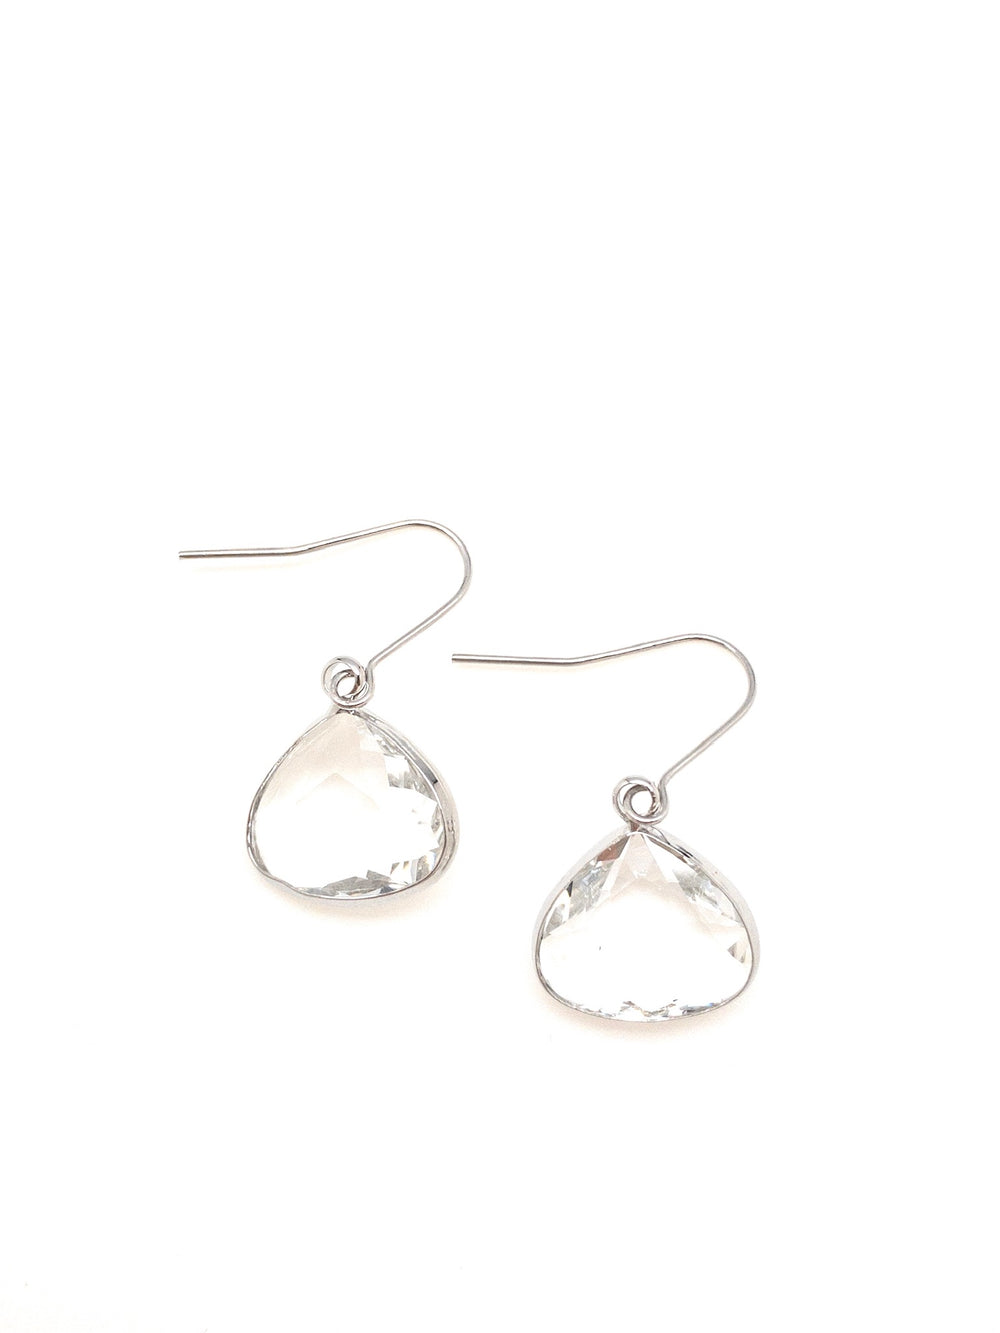 Kassie earrings with silver and clear glass